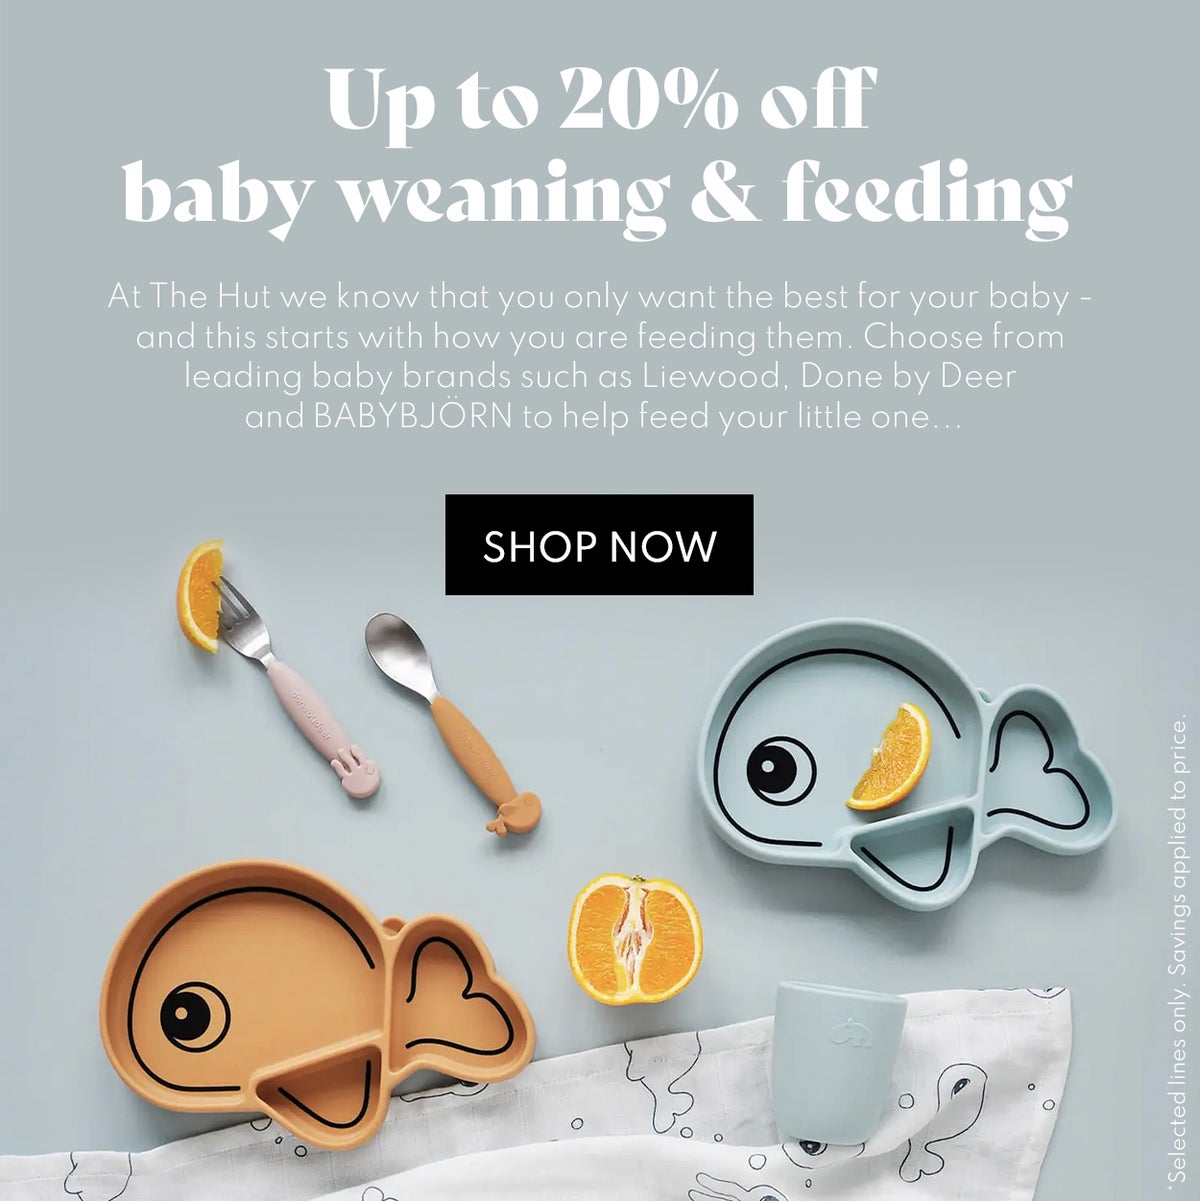 Up to 20% off baby weaning and feeding